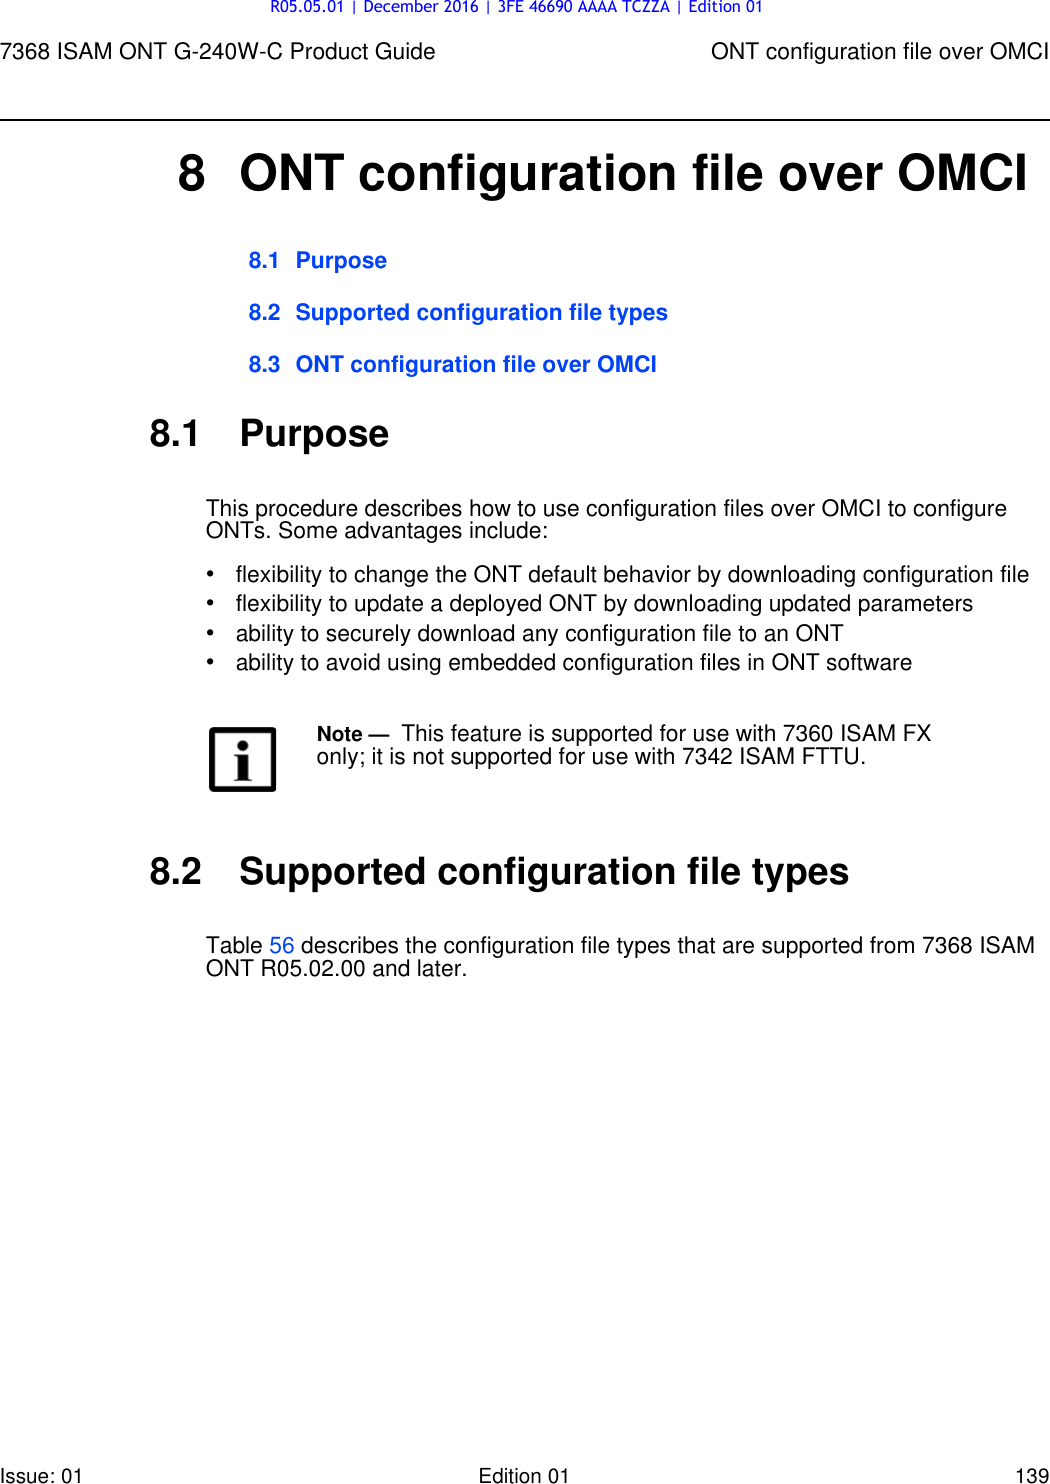 Page 139 of Nokia Bell G240W-C GPON ONU User Manual 7368 ISAM ONT G 240W B Product Guide